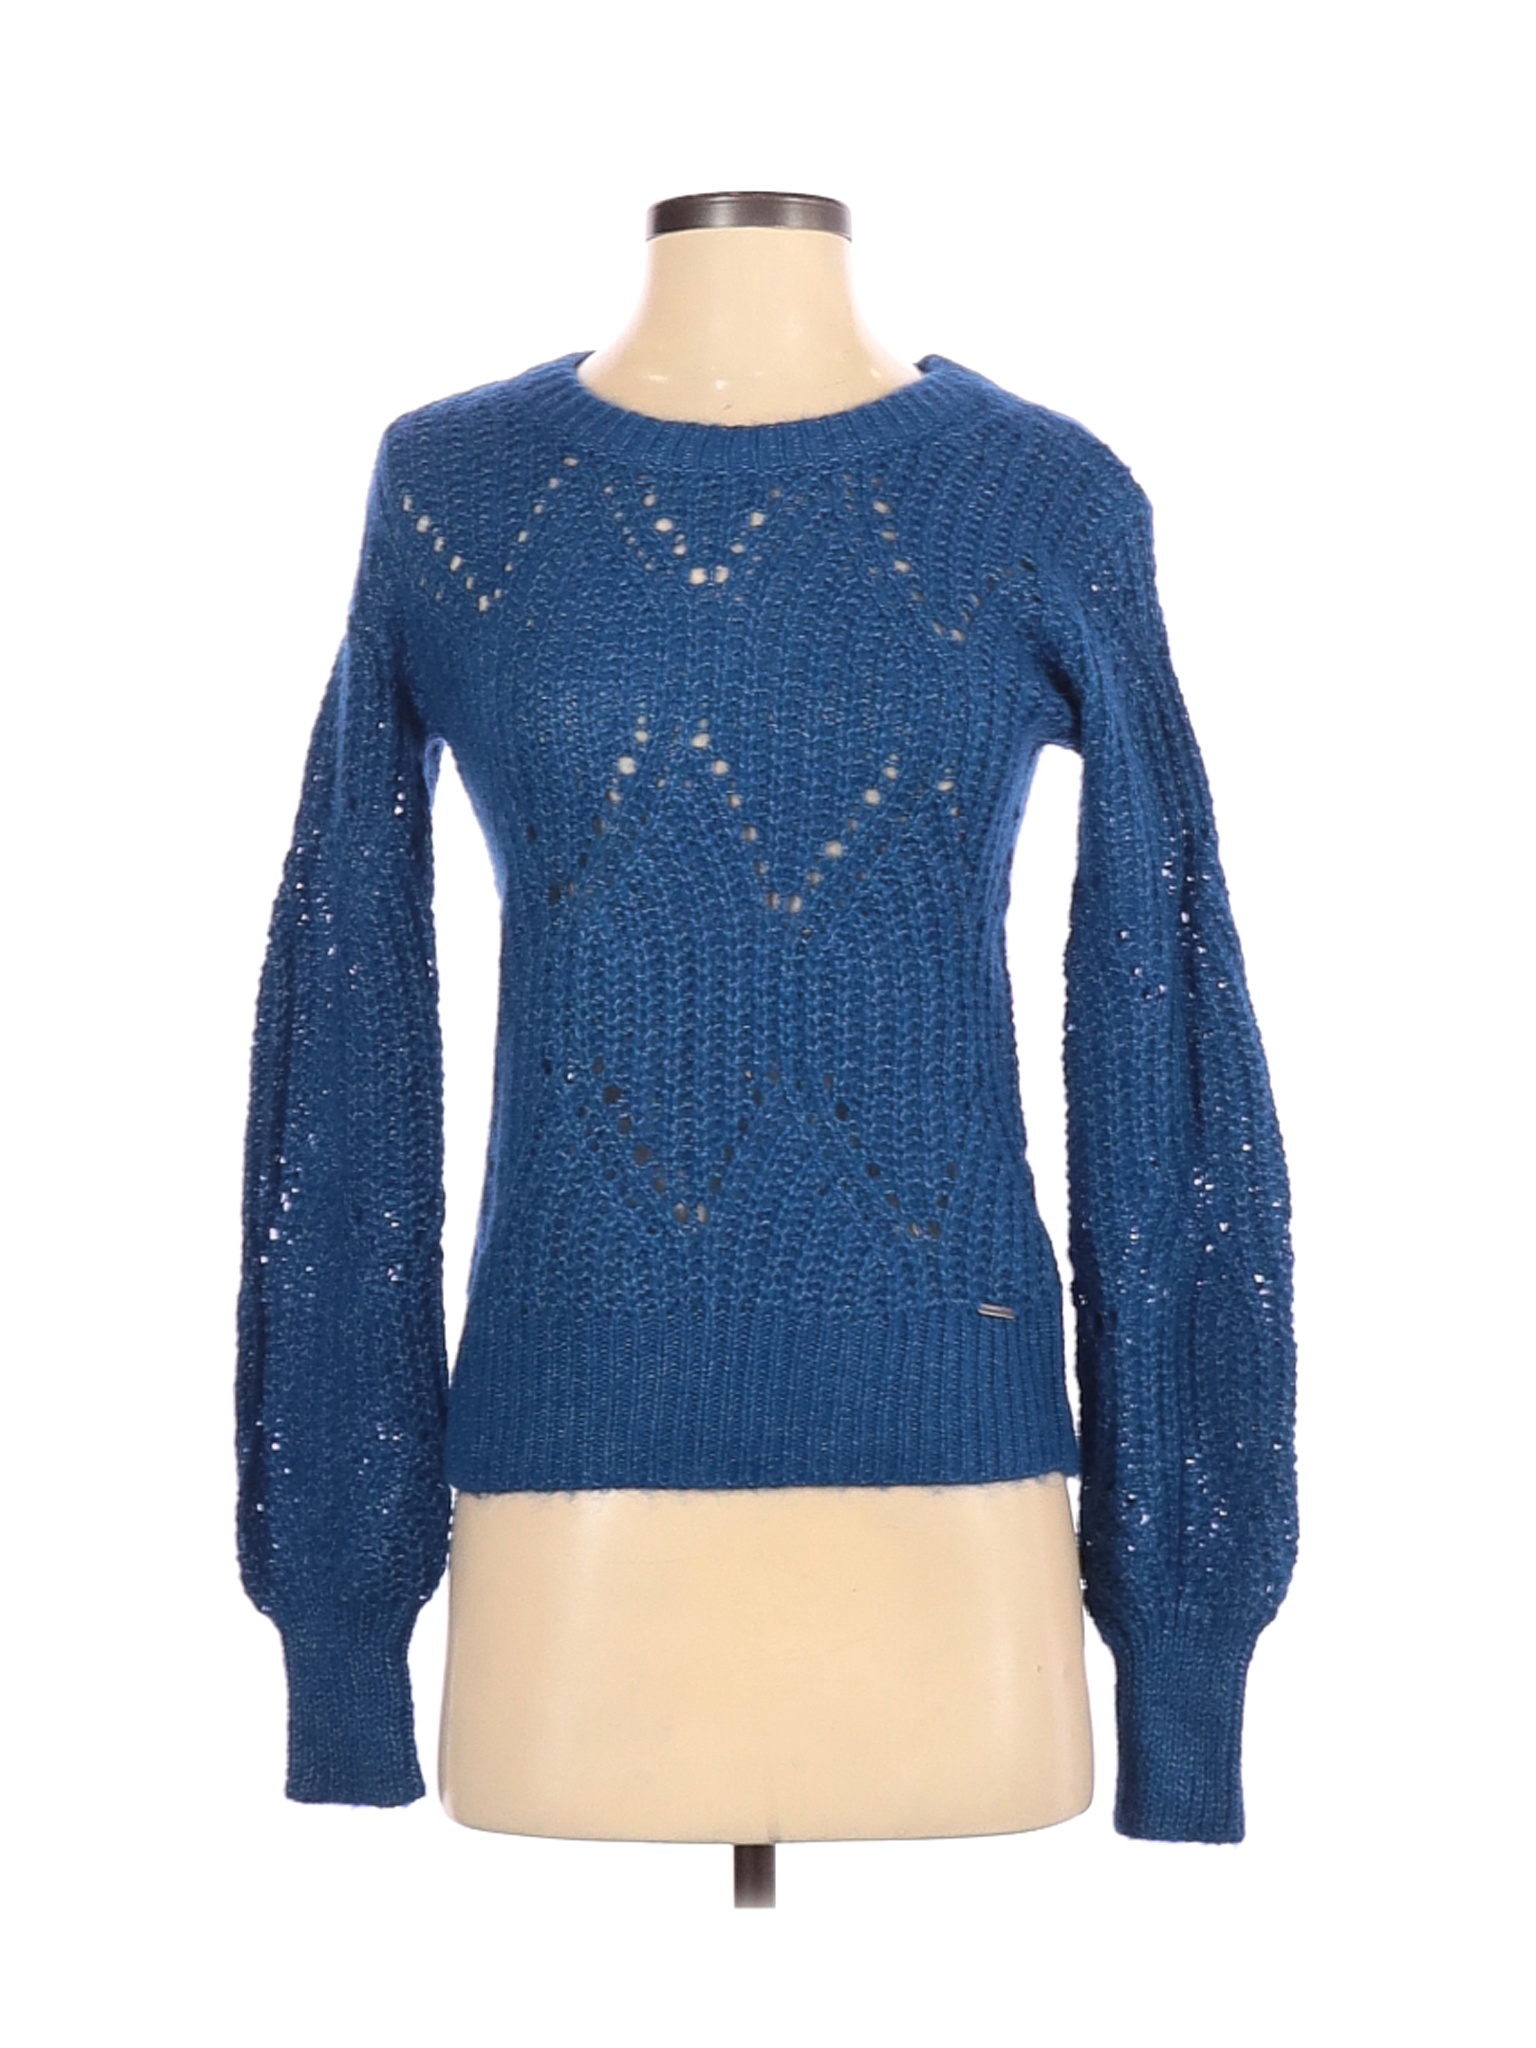 Abercrombie & Fitch Women Blue Pullover Sweater XS | eBay